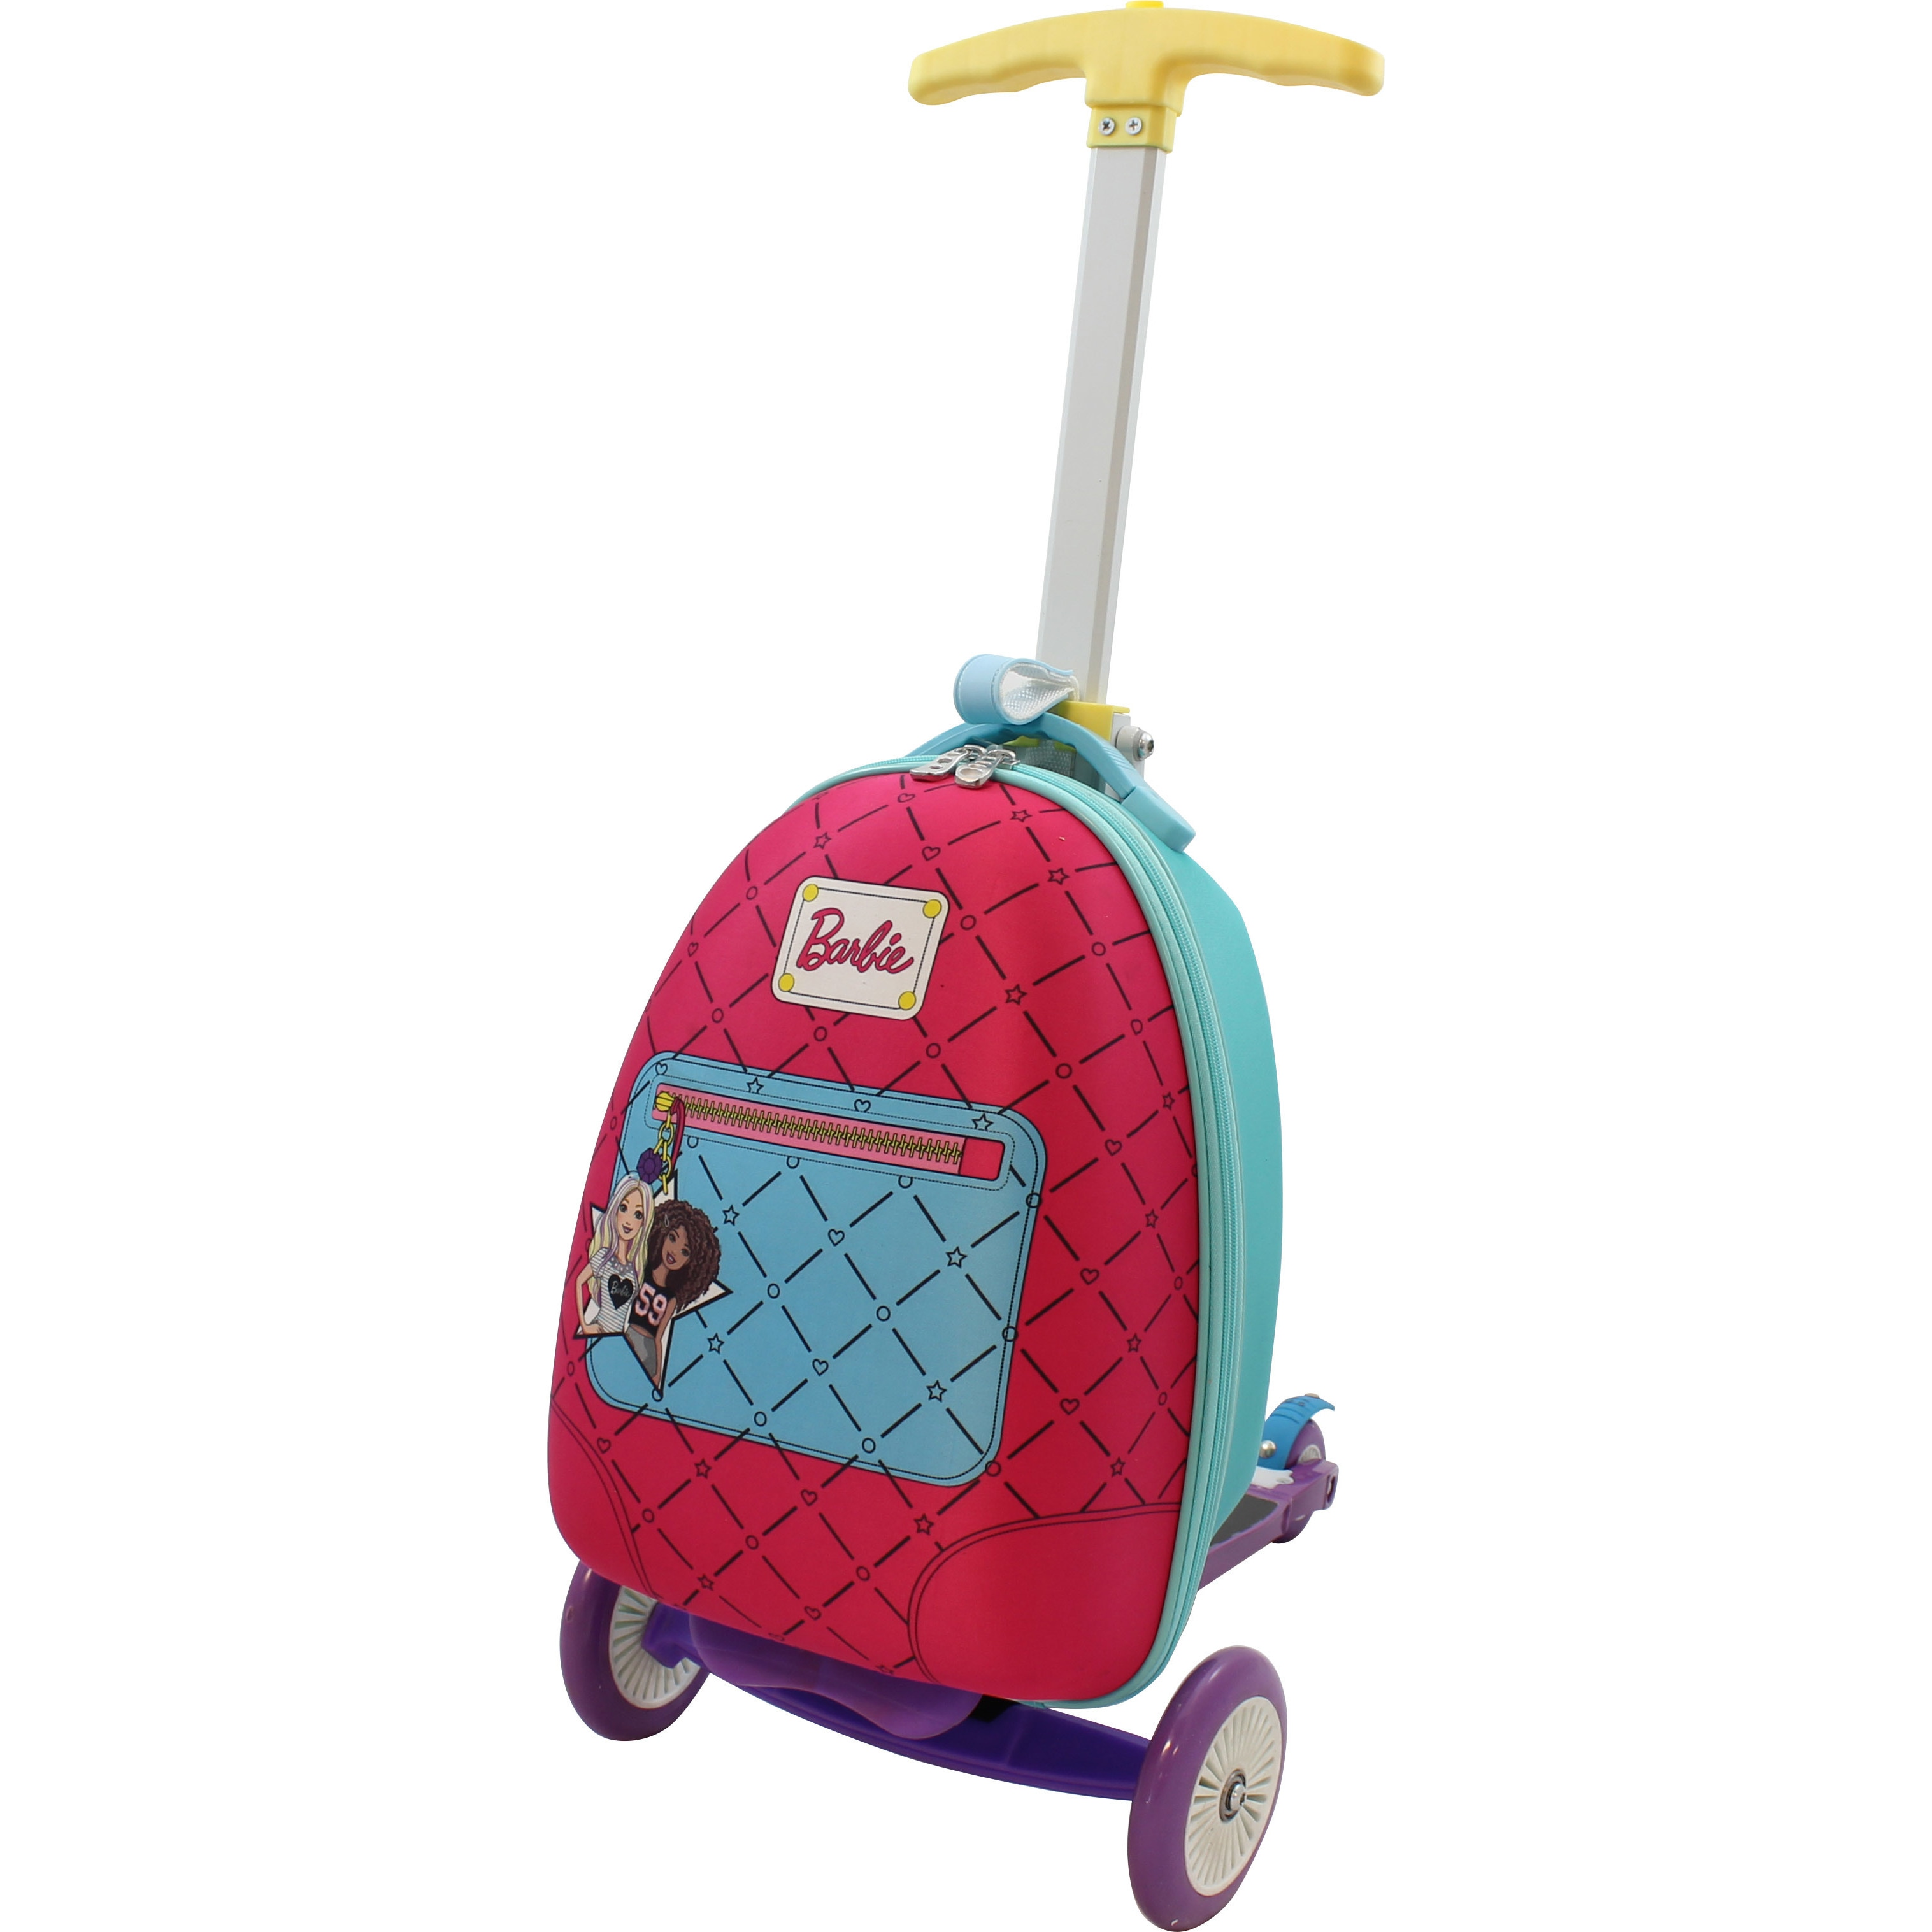 barbie carry on luggage